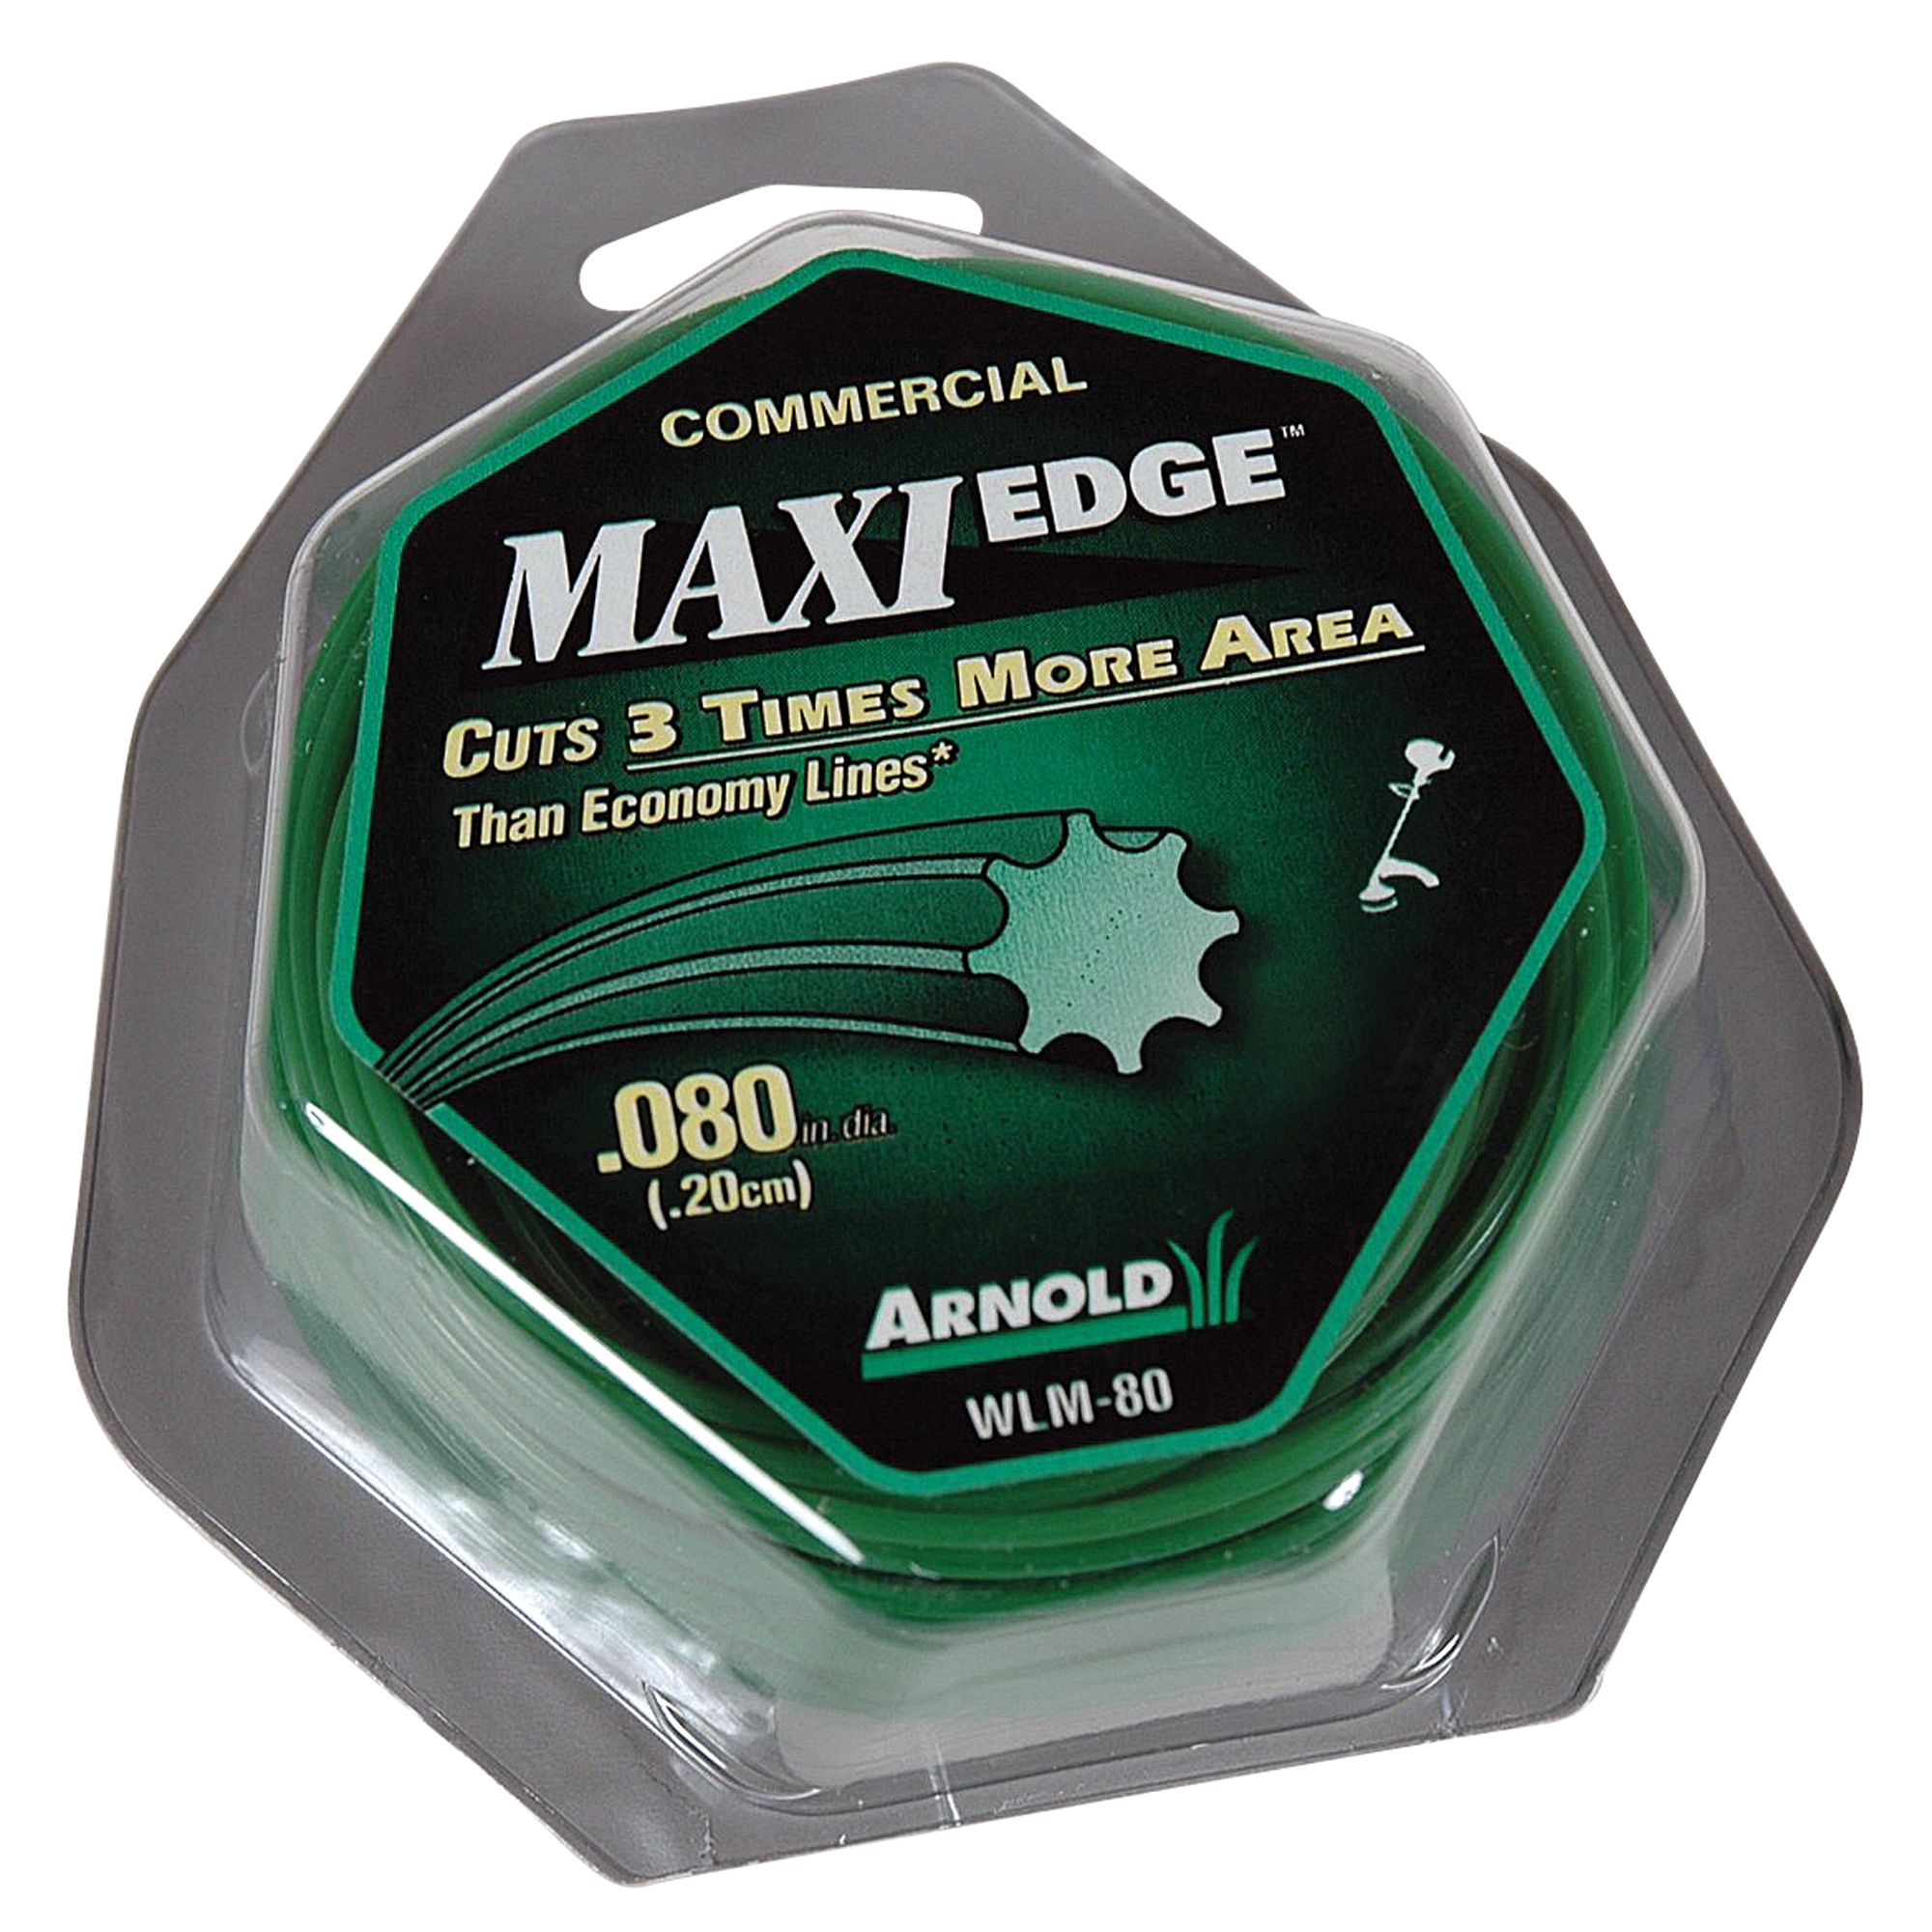 Arnold WLM-80 MAXI Edge&trade; Trimmer Line, 40 ft. of .080 in. diameter